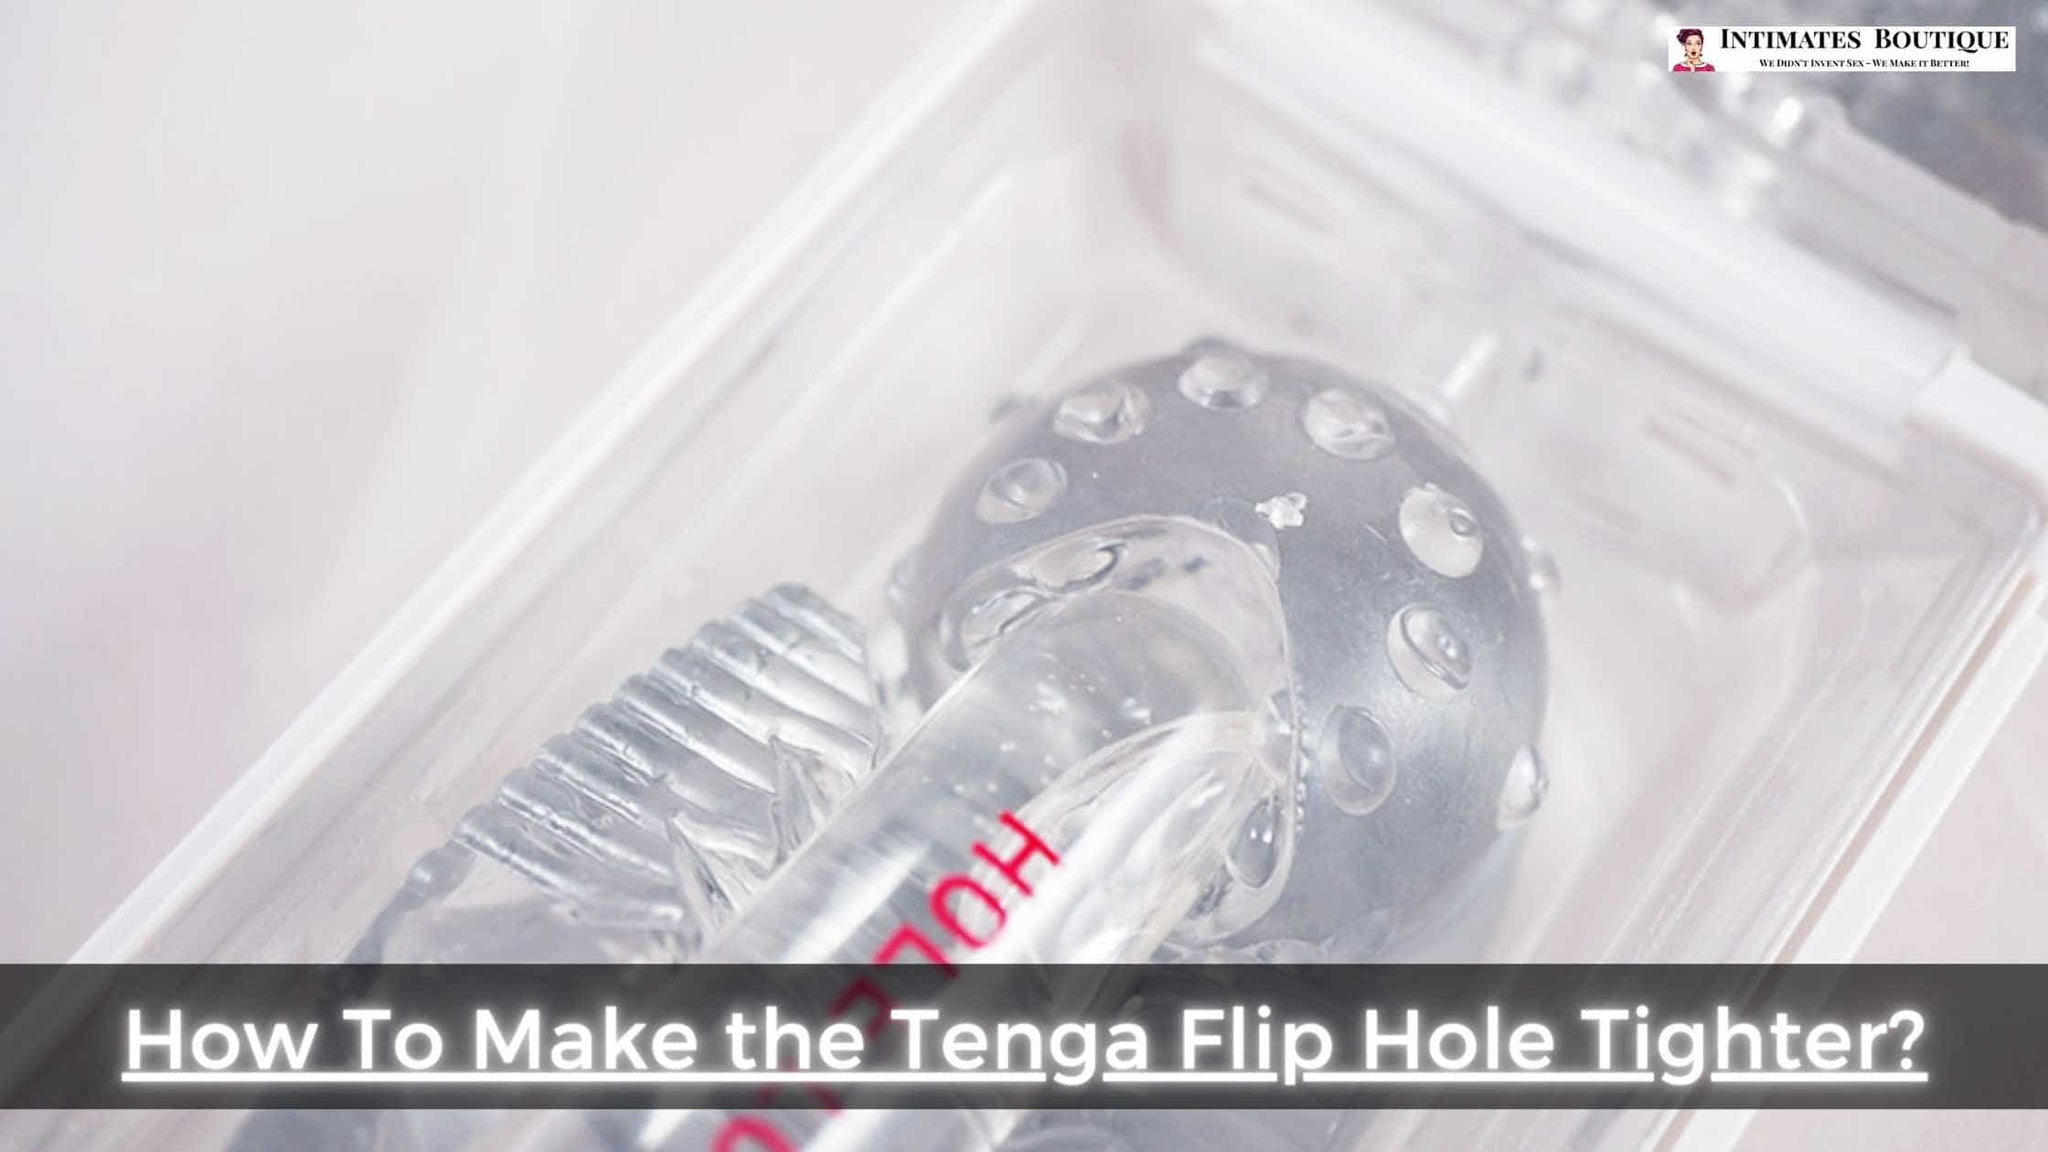 How To Make the Tenga Flip Hole Tighter?